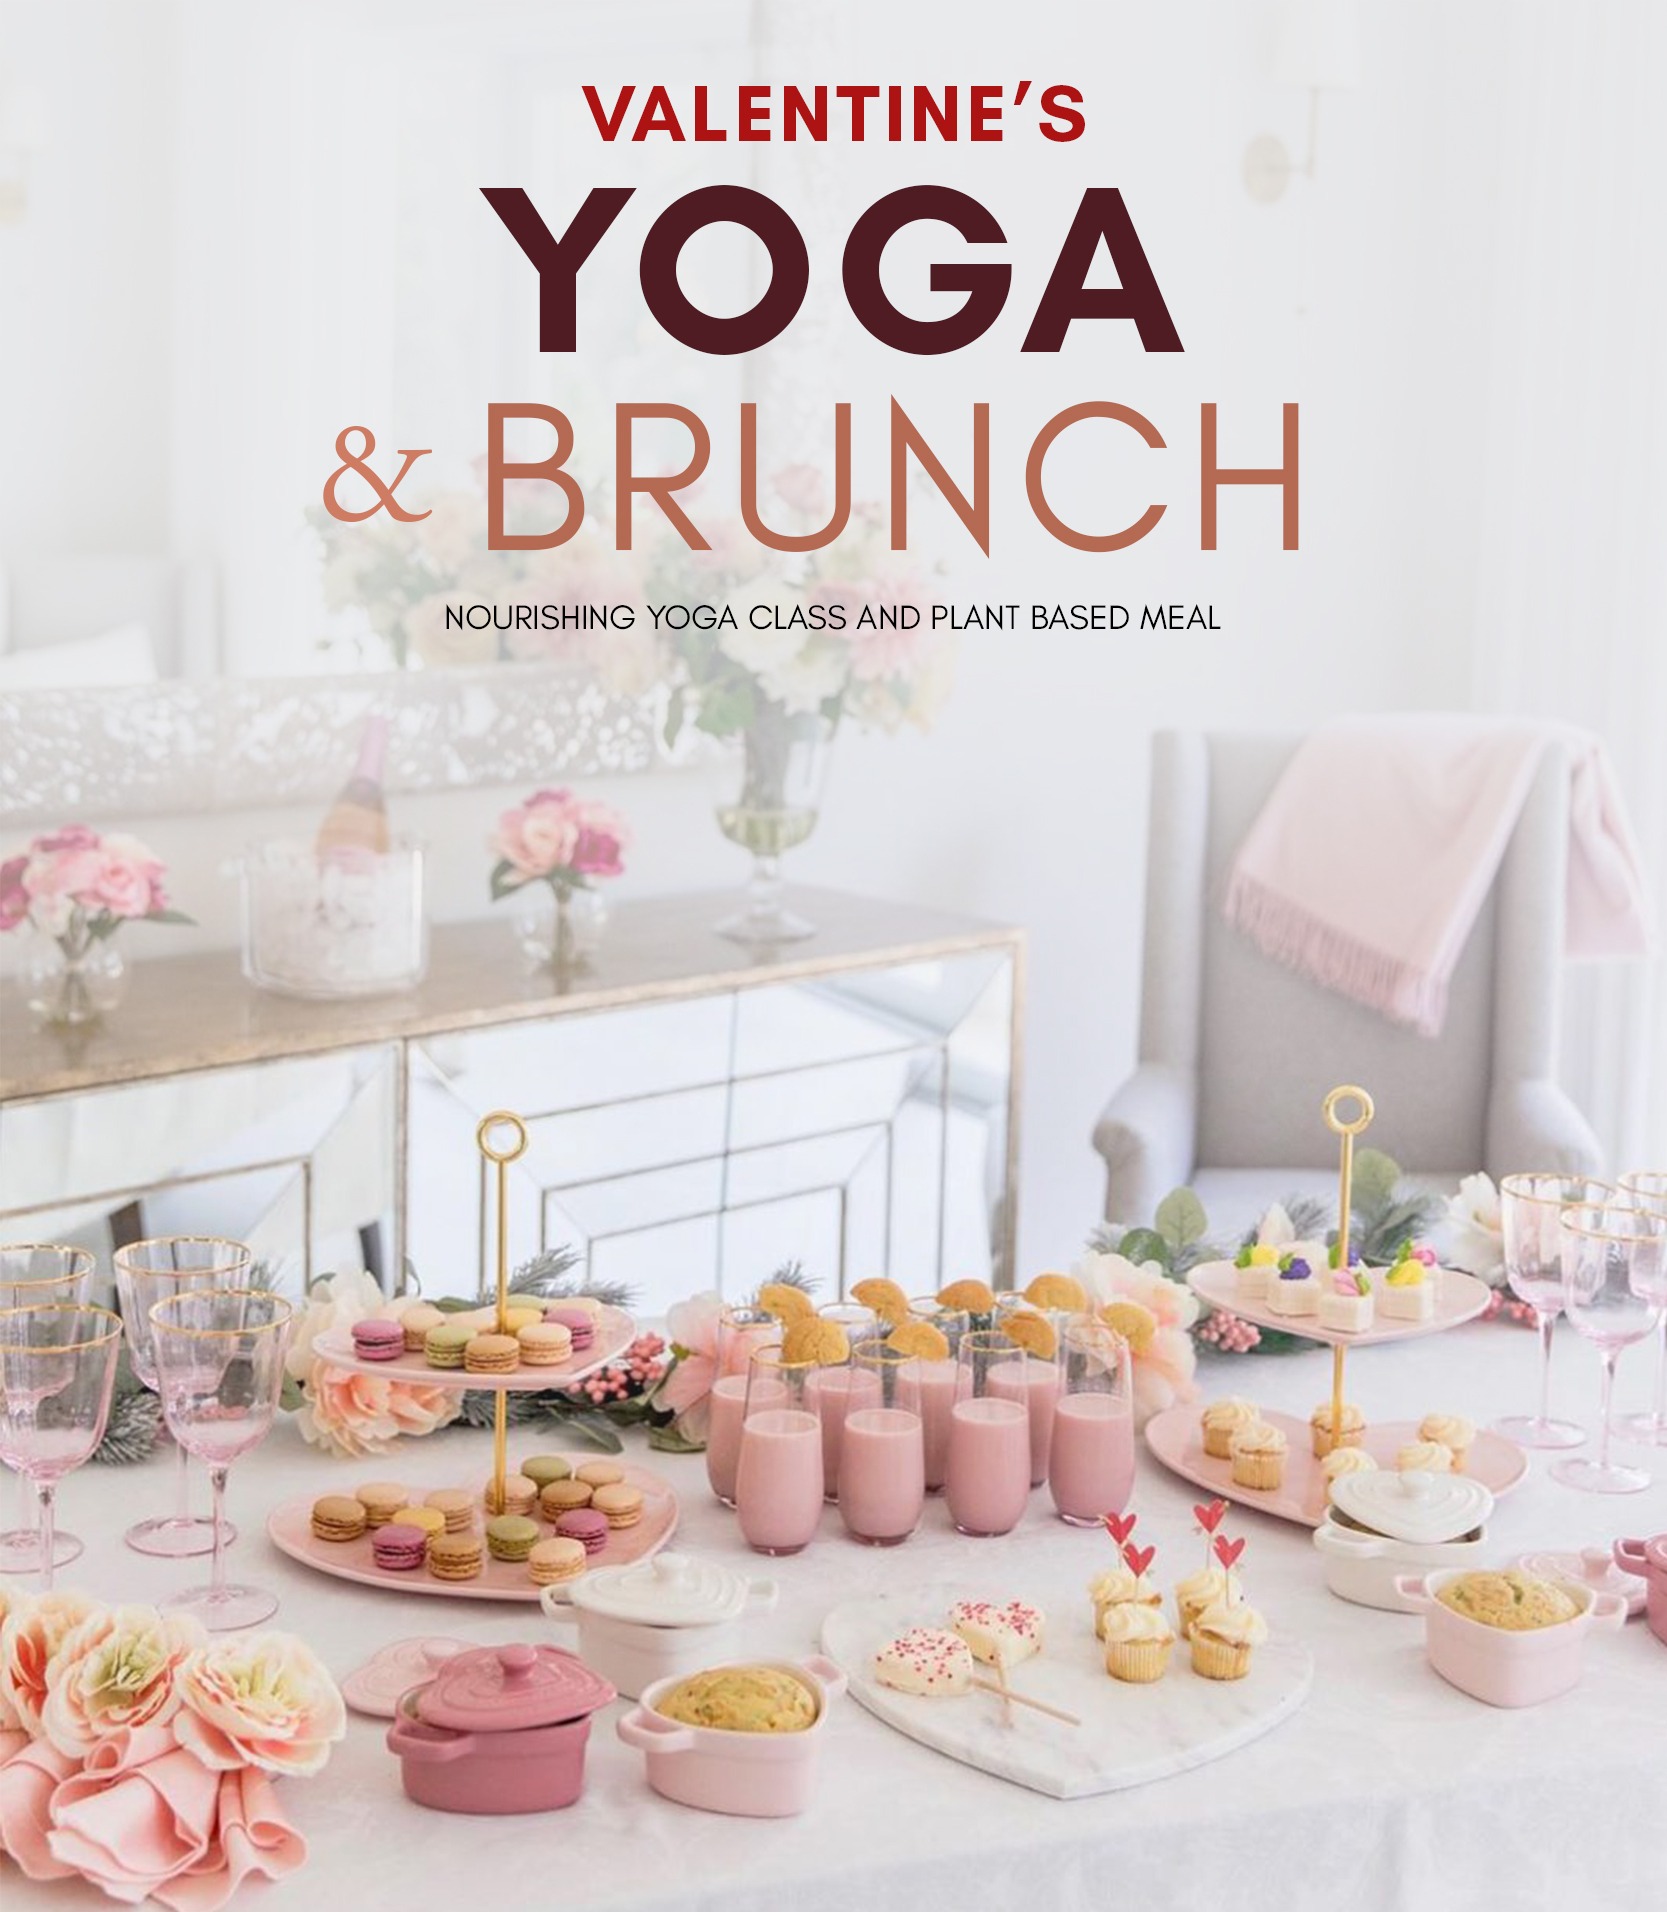 Valentines Yoga and Brunch